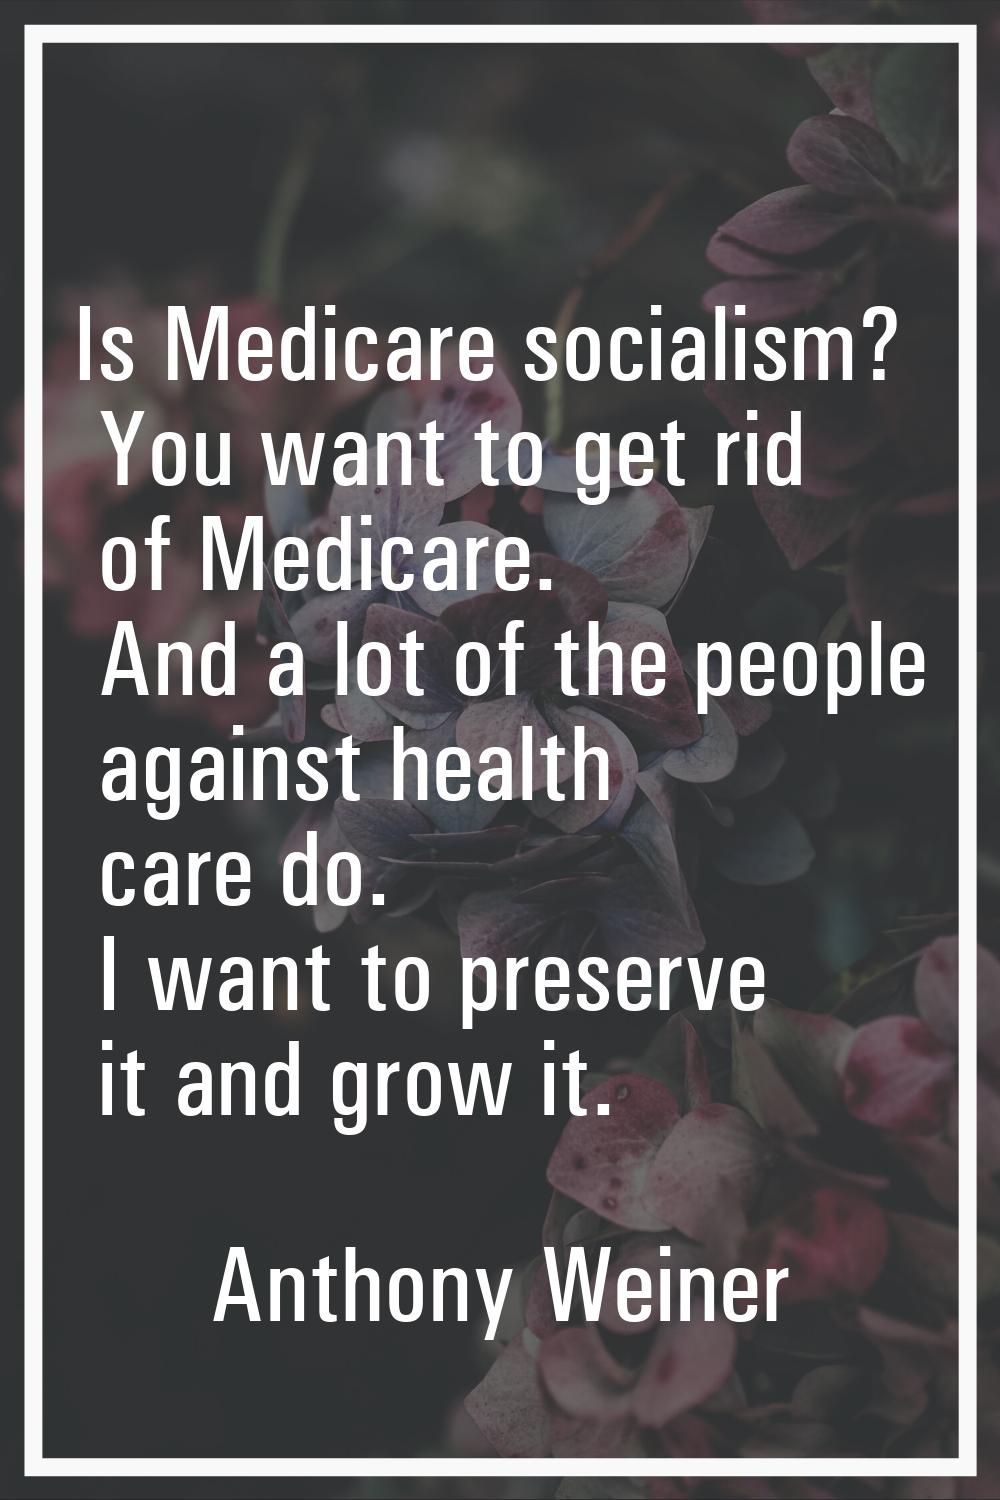 Is Medicare socialism? You want to get rid of Medicare. And a lot of the people against health care